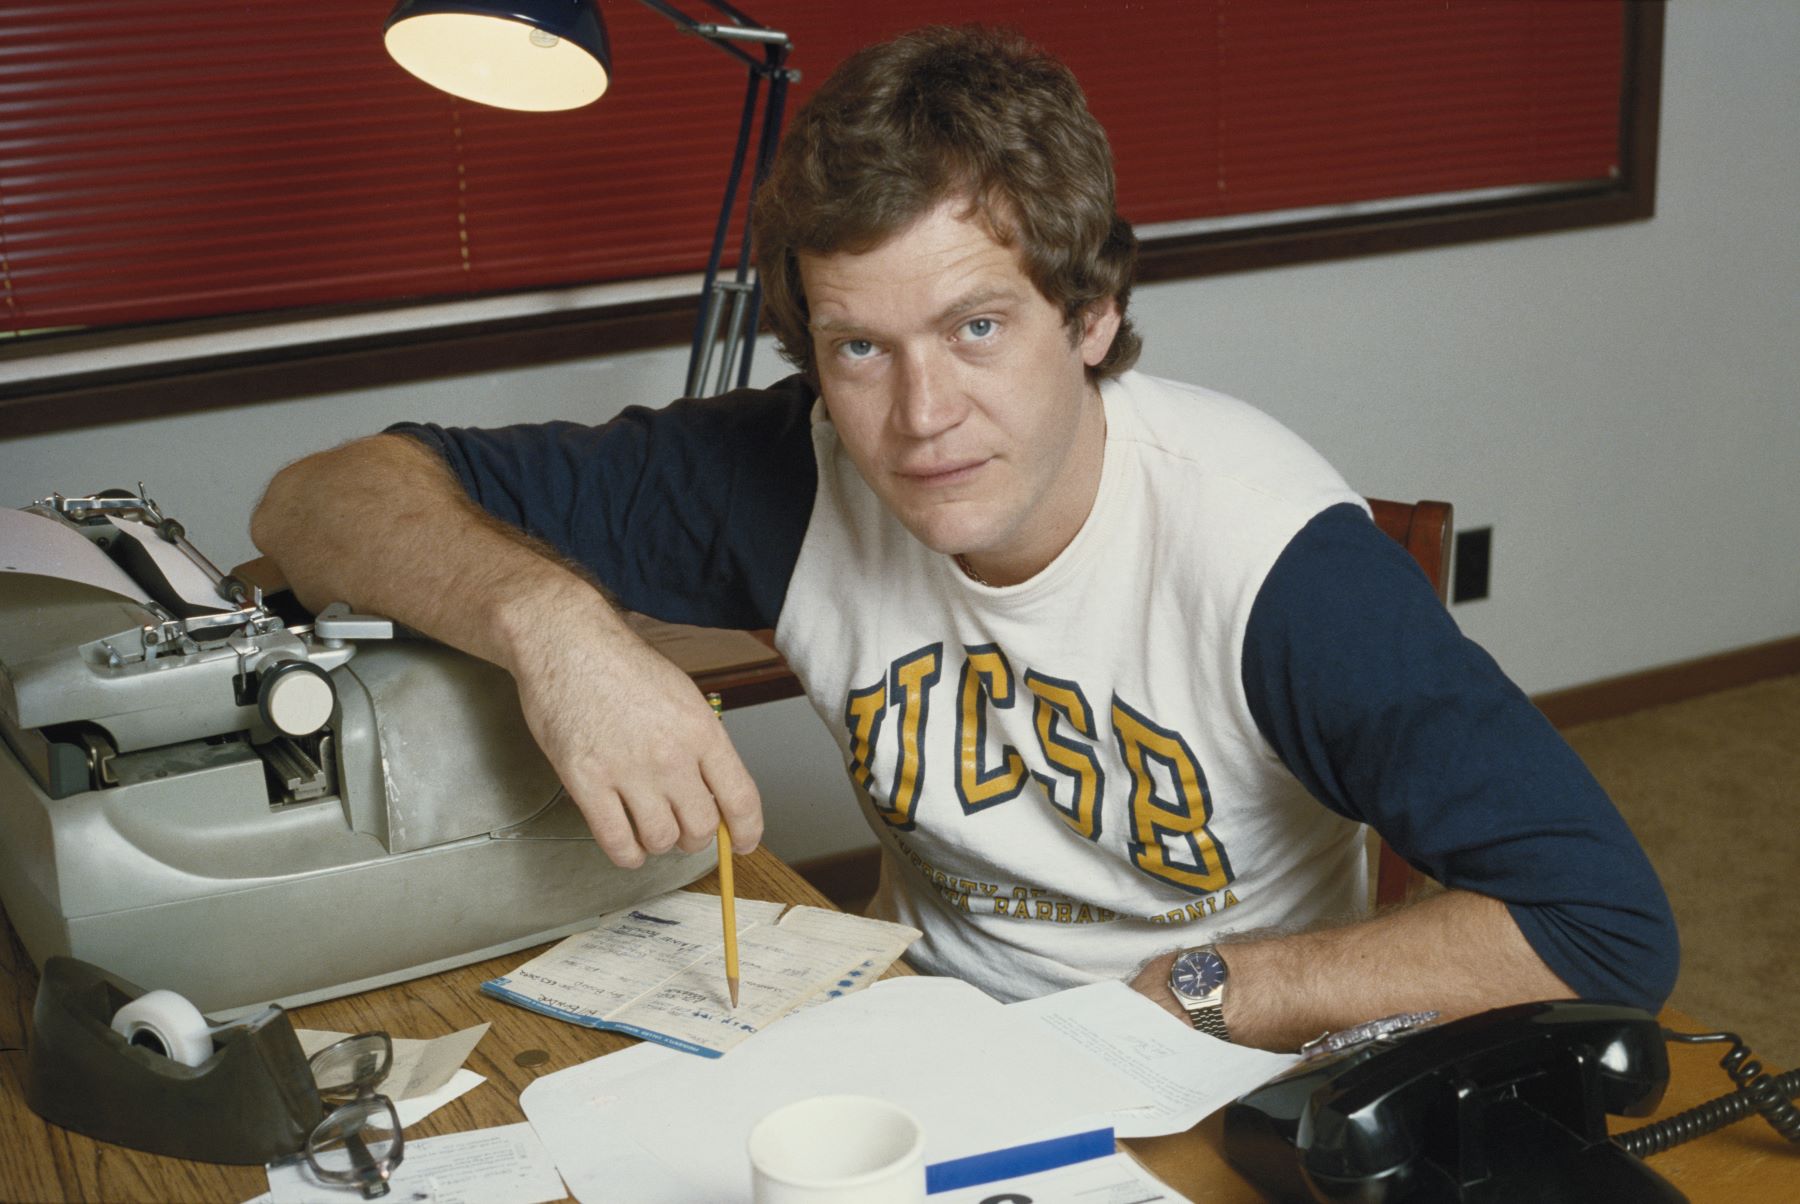 TV show host and comedian David Letterman pictured writing at a desk in 1980